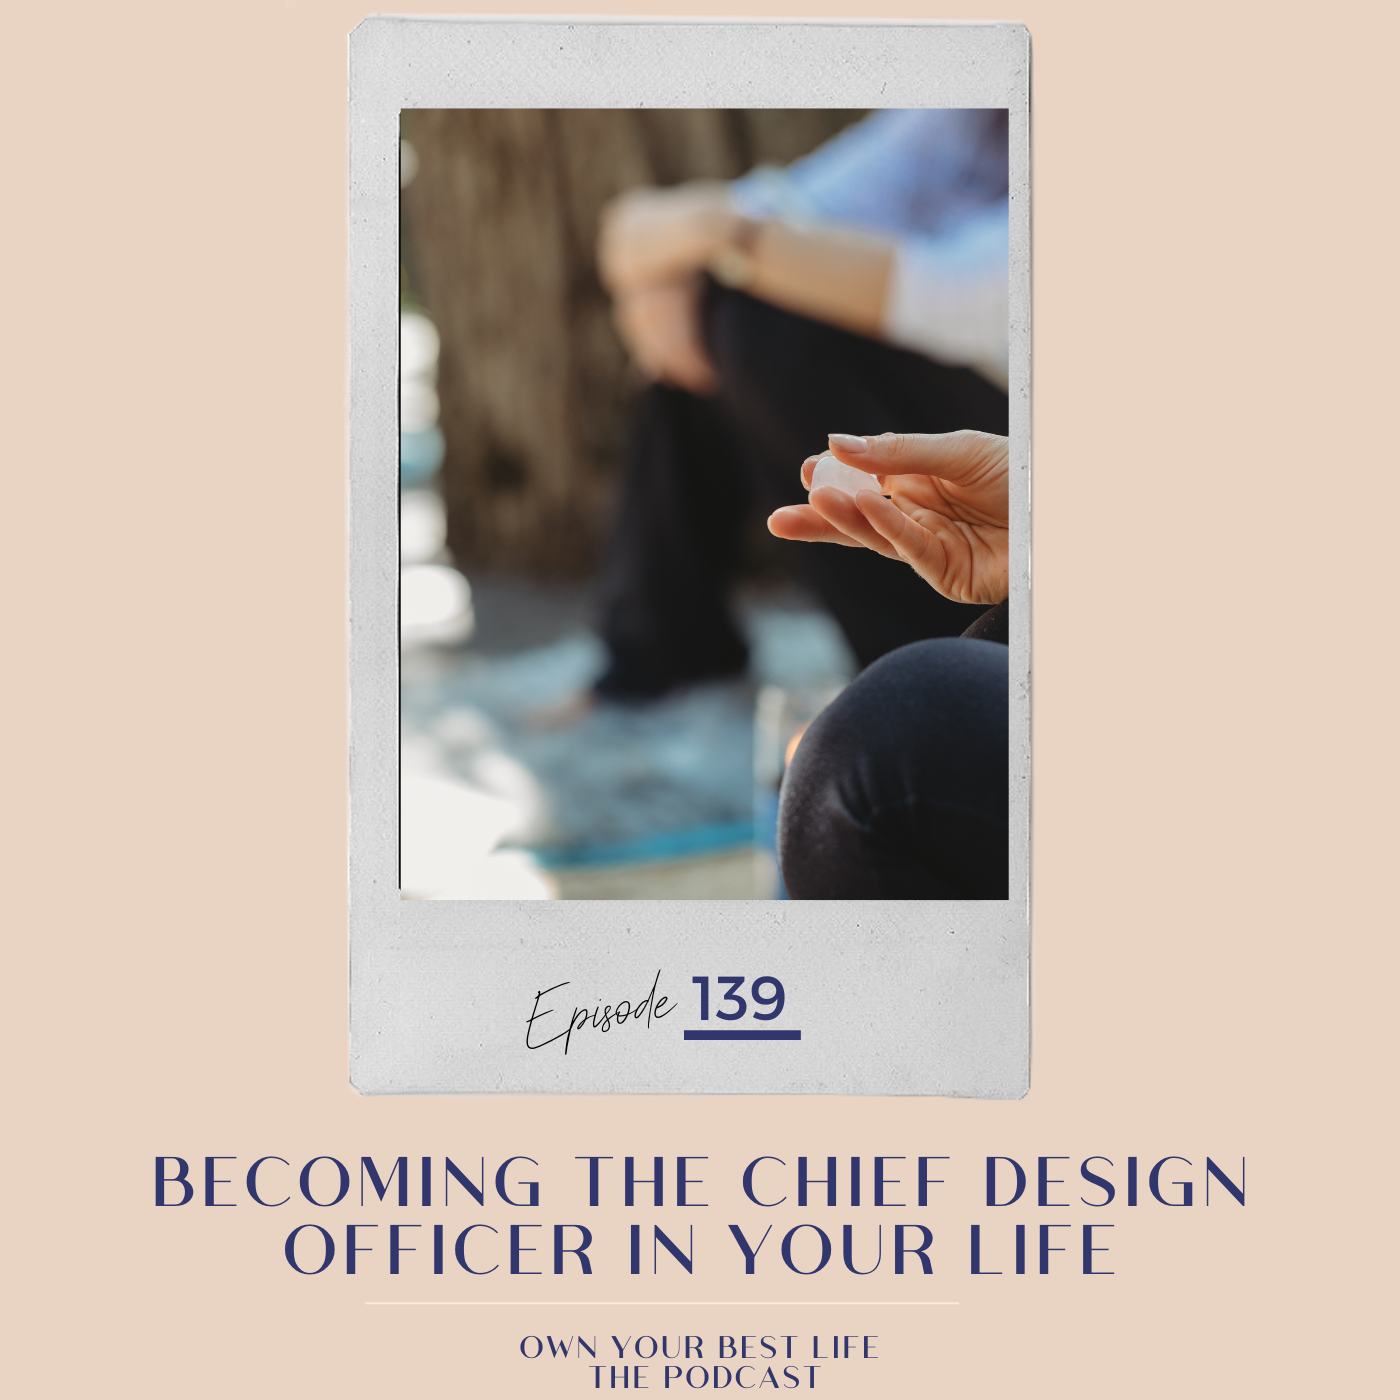 Becoming the Chief Design Officer in your life